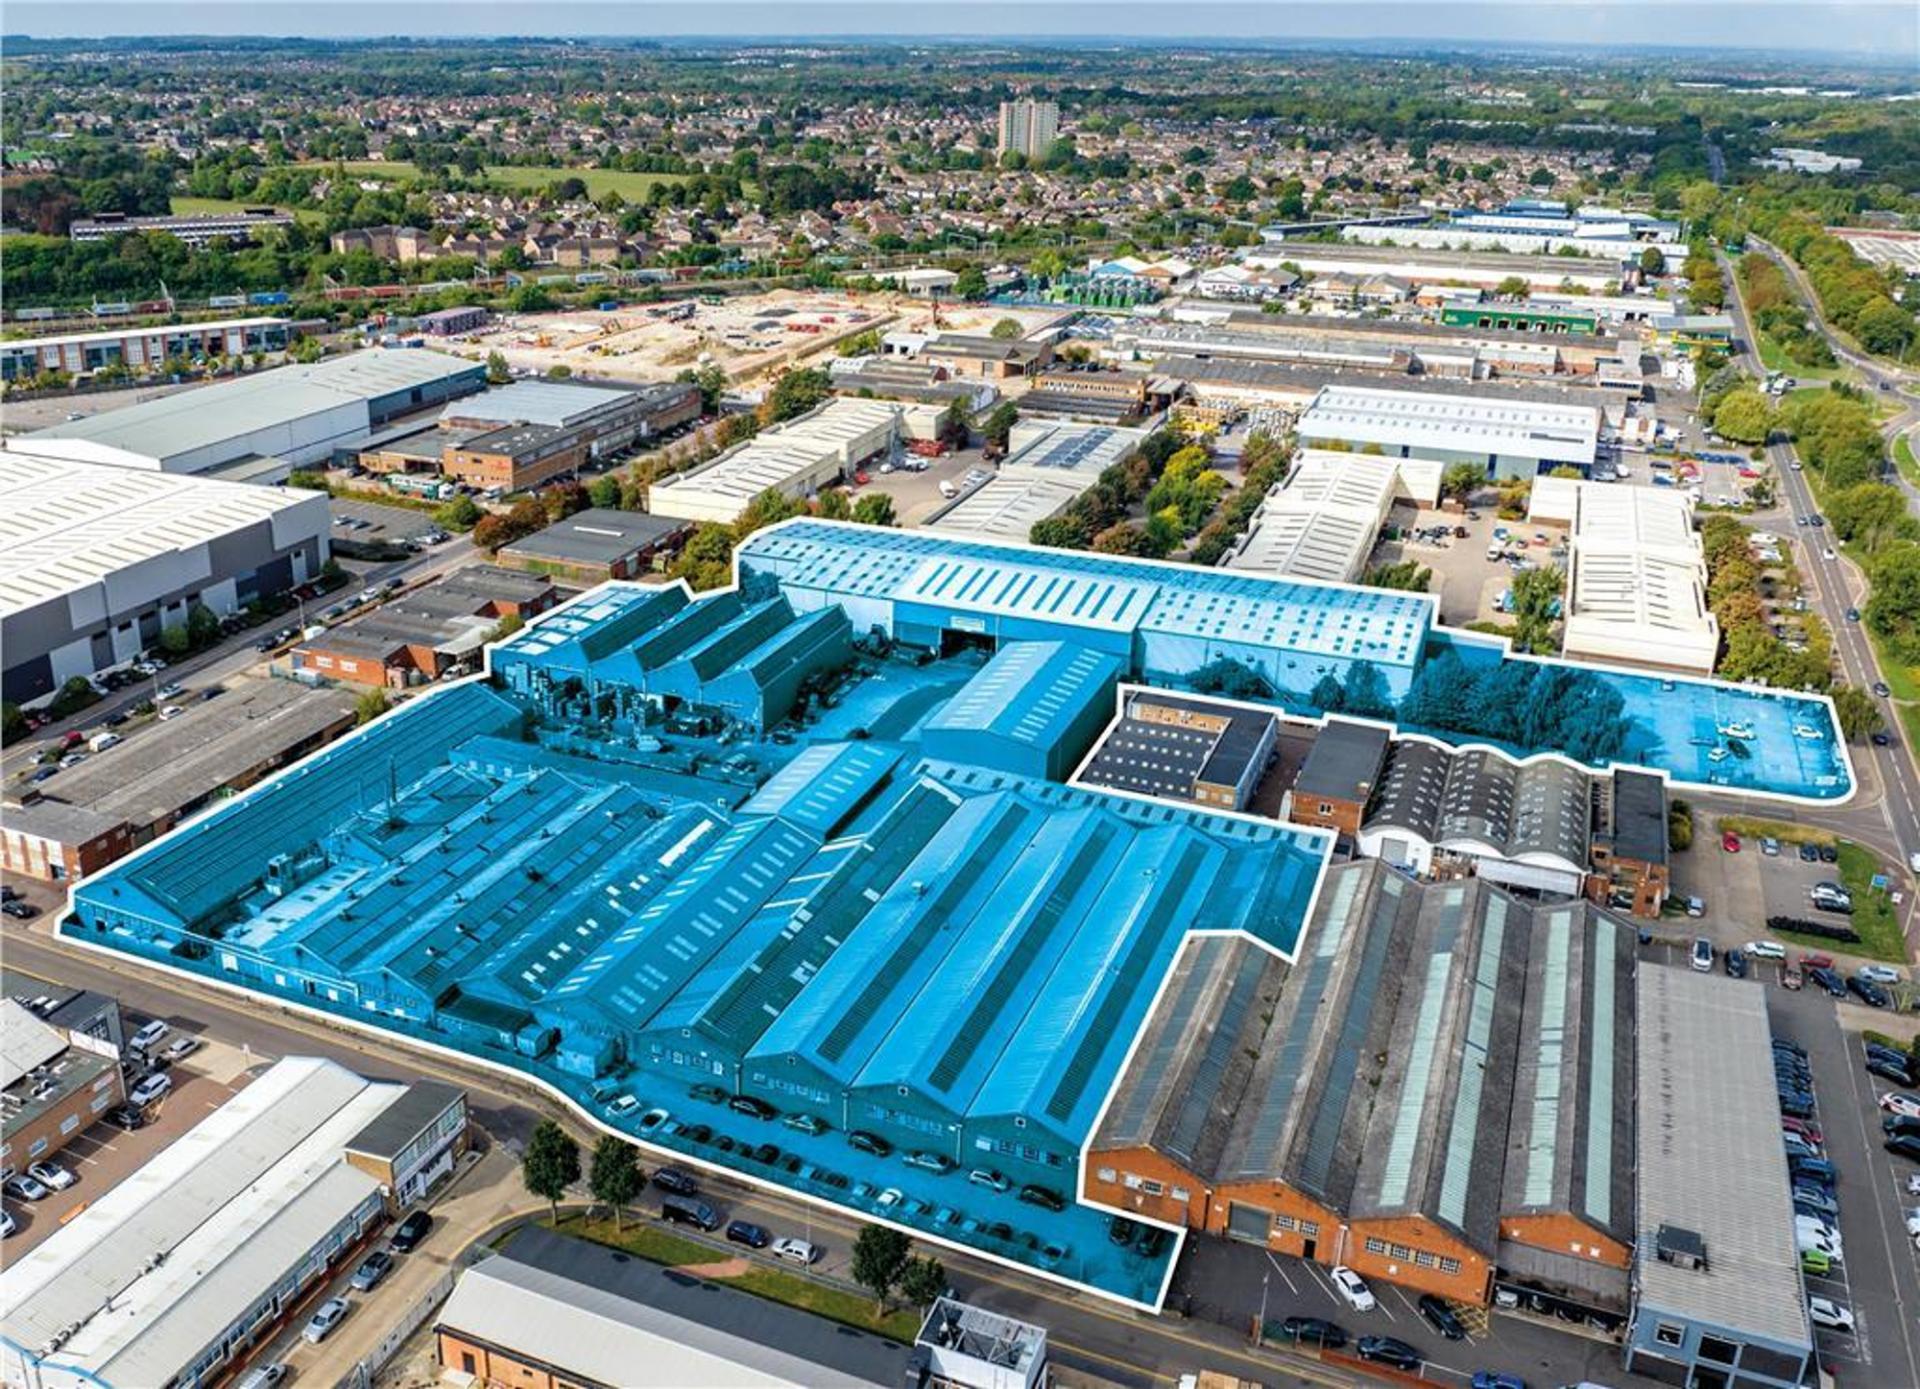 £12m industrial and warehouse complex for sale with owner in administration 